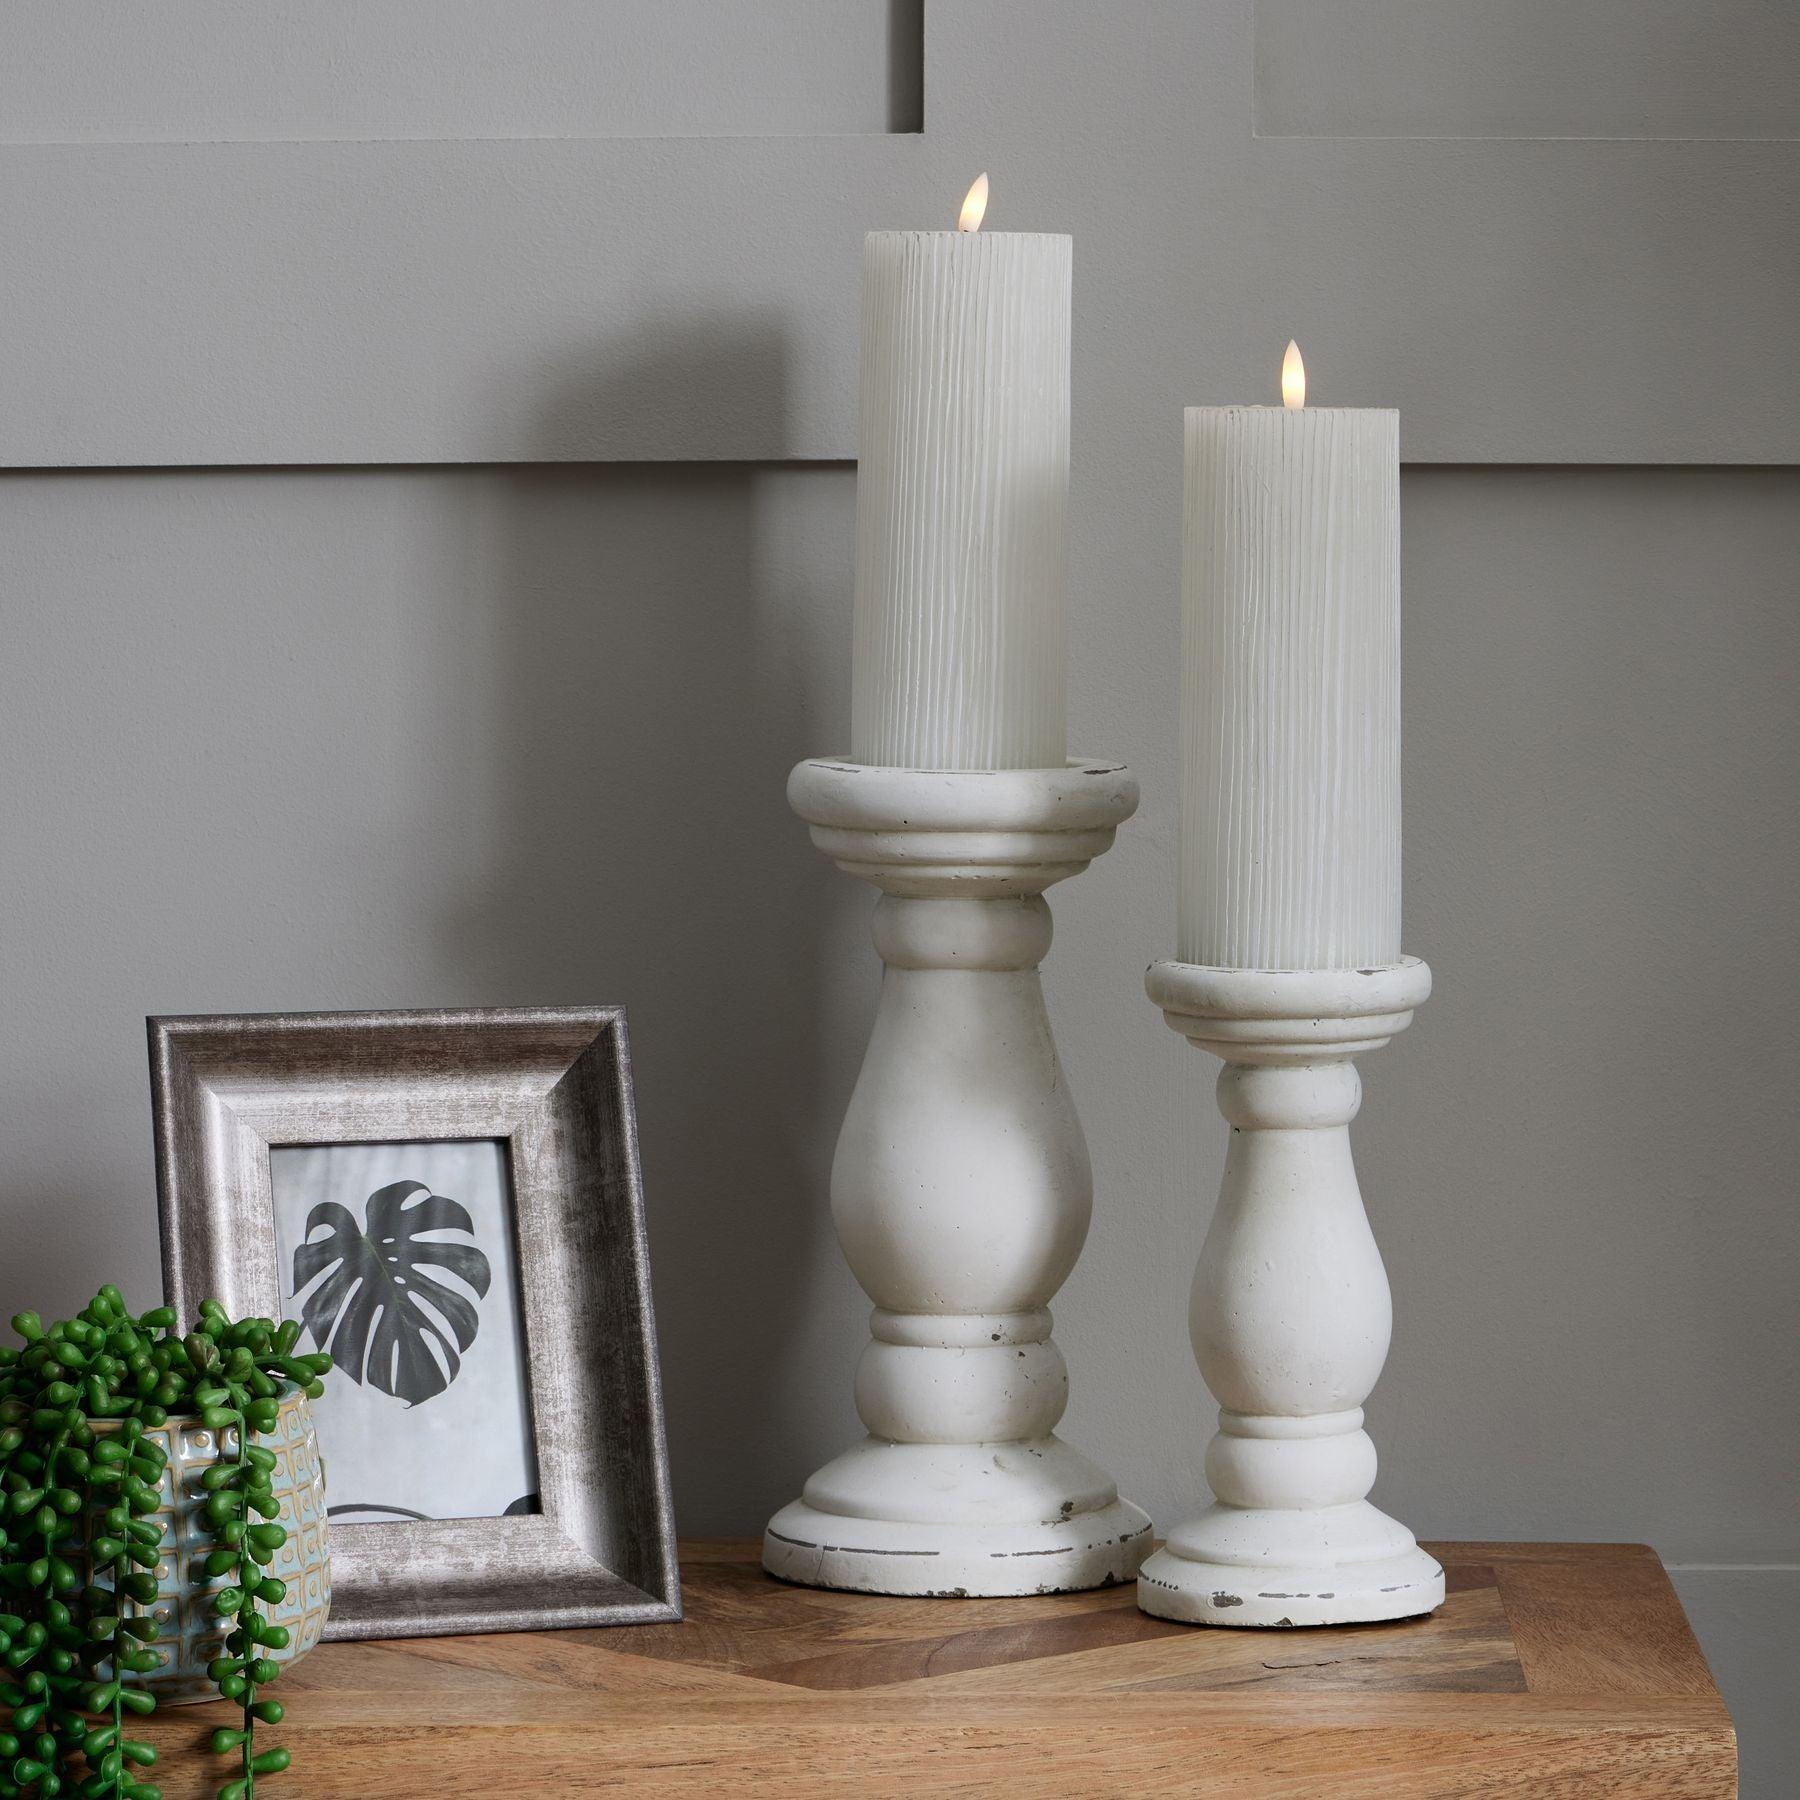 Small Matt White Ceramic Candle Holder-Gifts & Accessories > Candle Holders > Ornaments